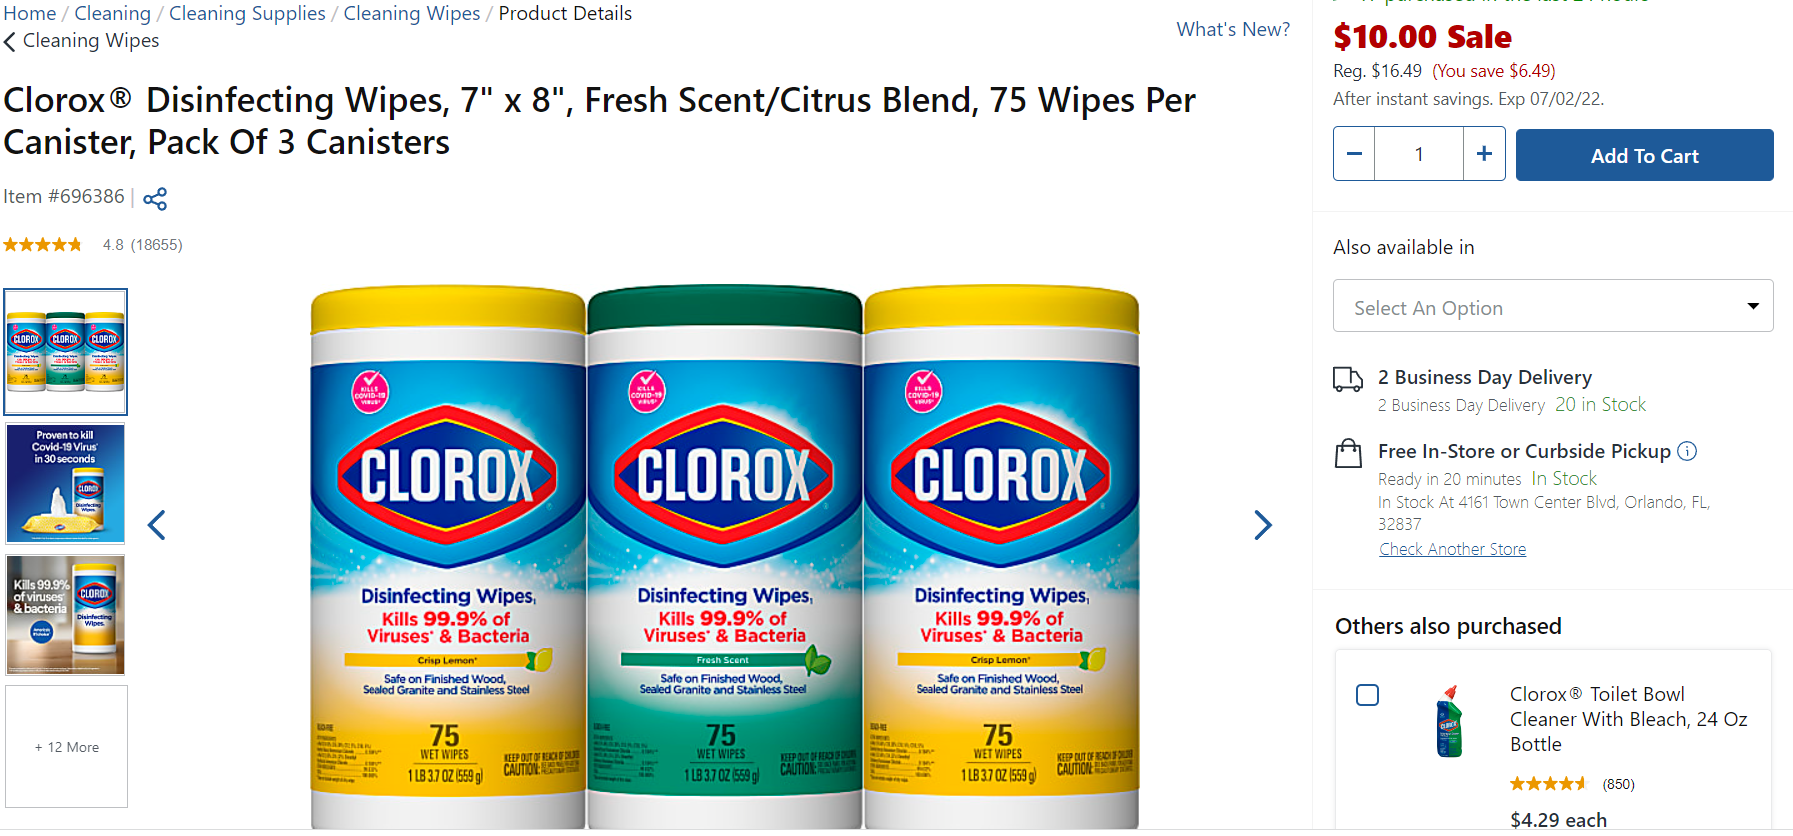 Clorox Disinfecting Wipes Pack Of 3 Canisters Only $10